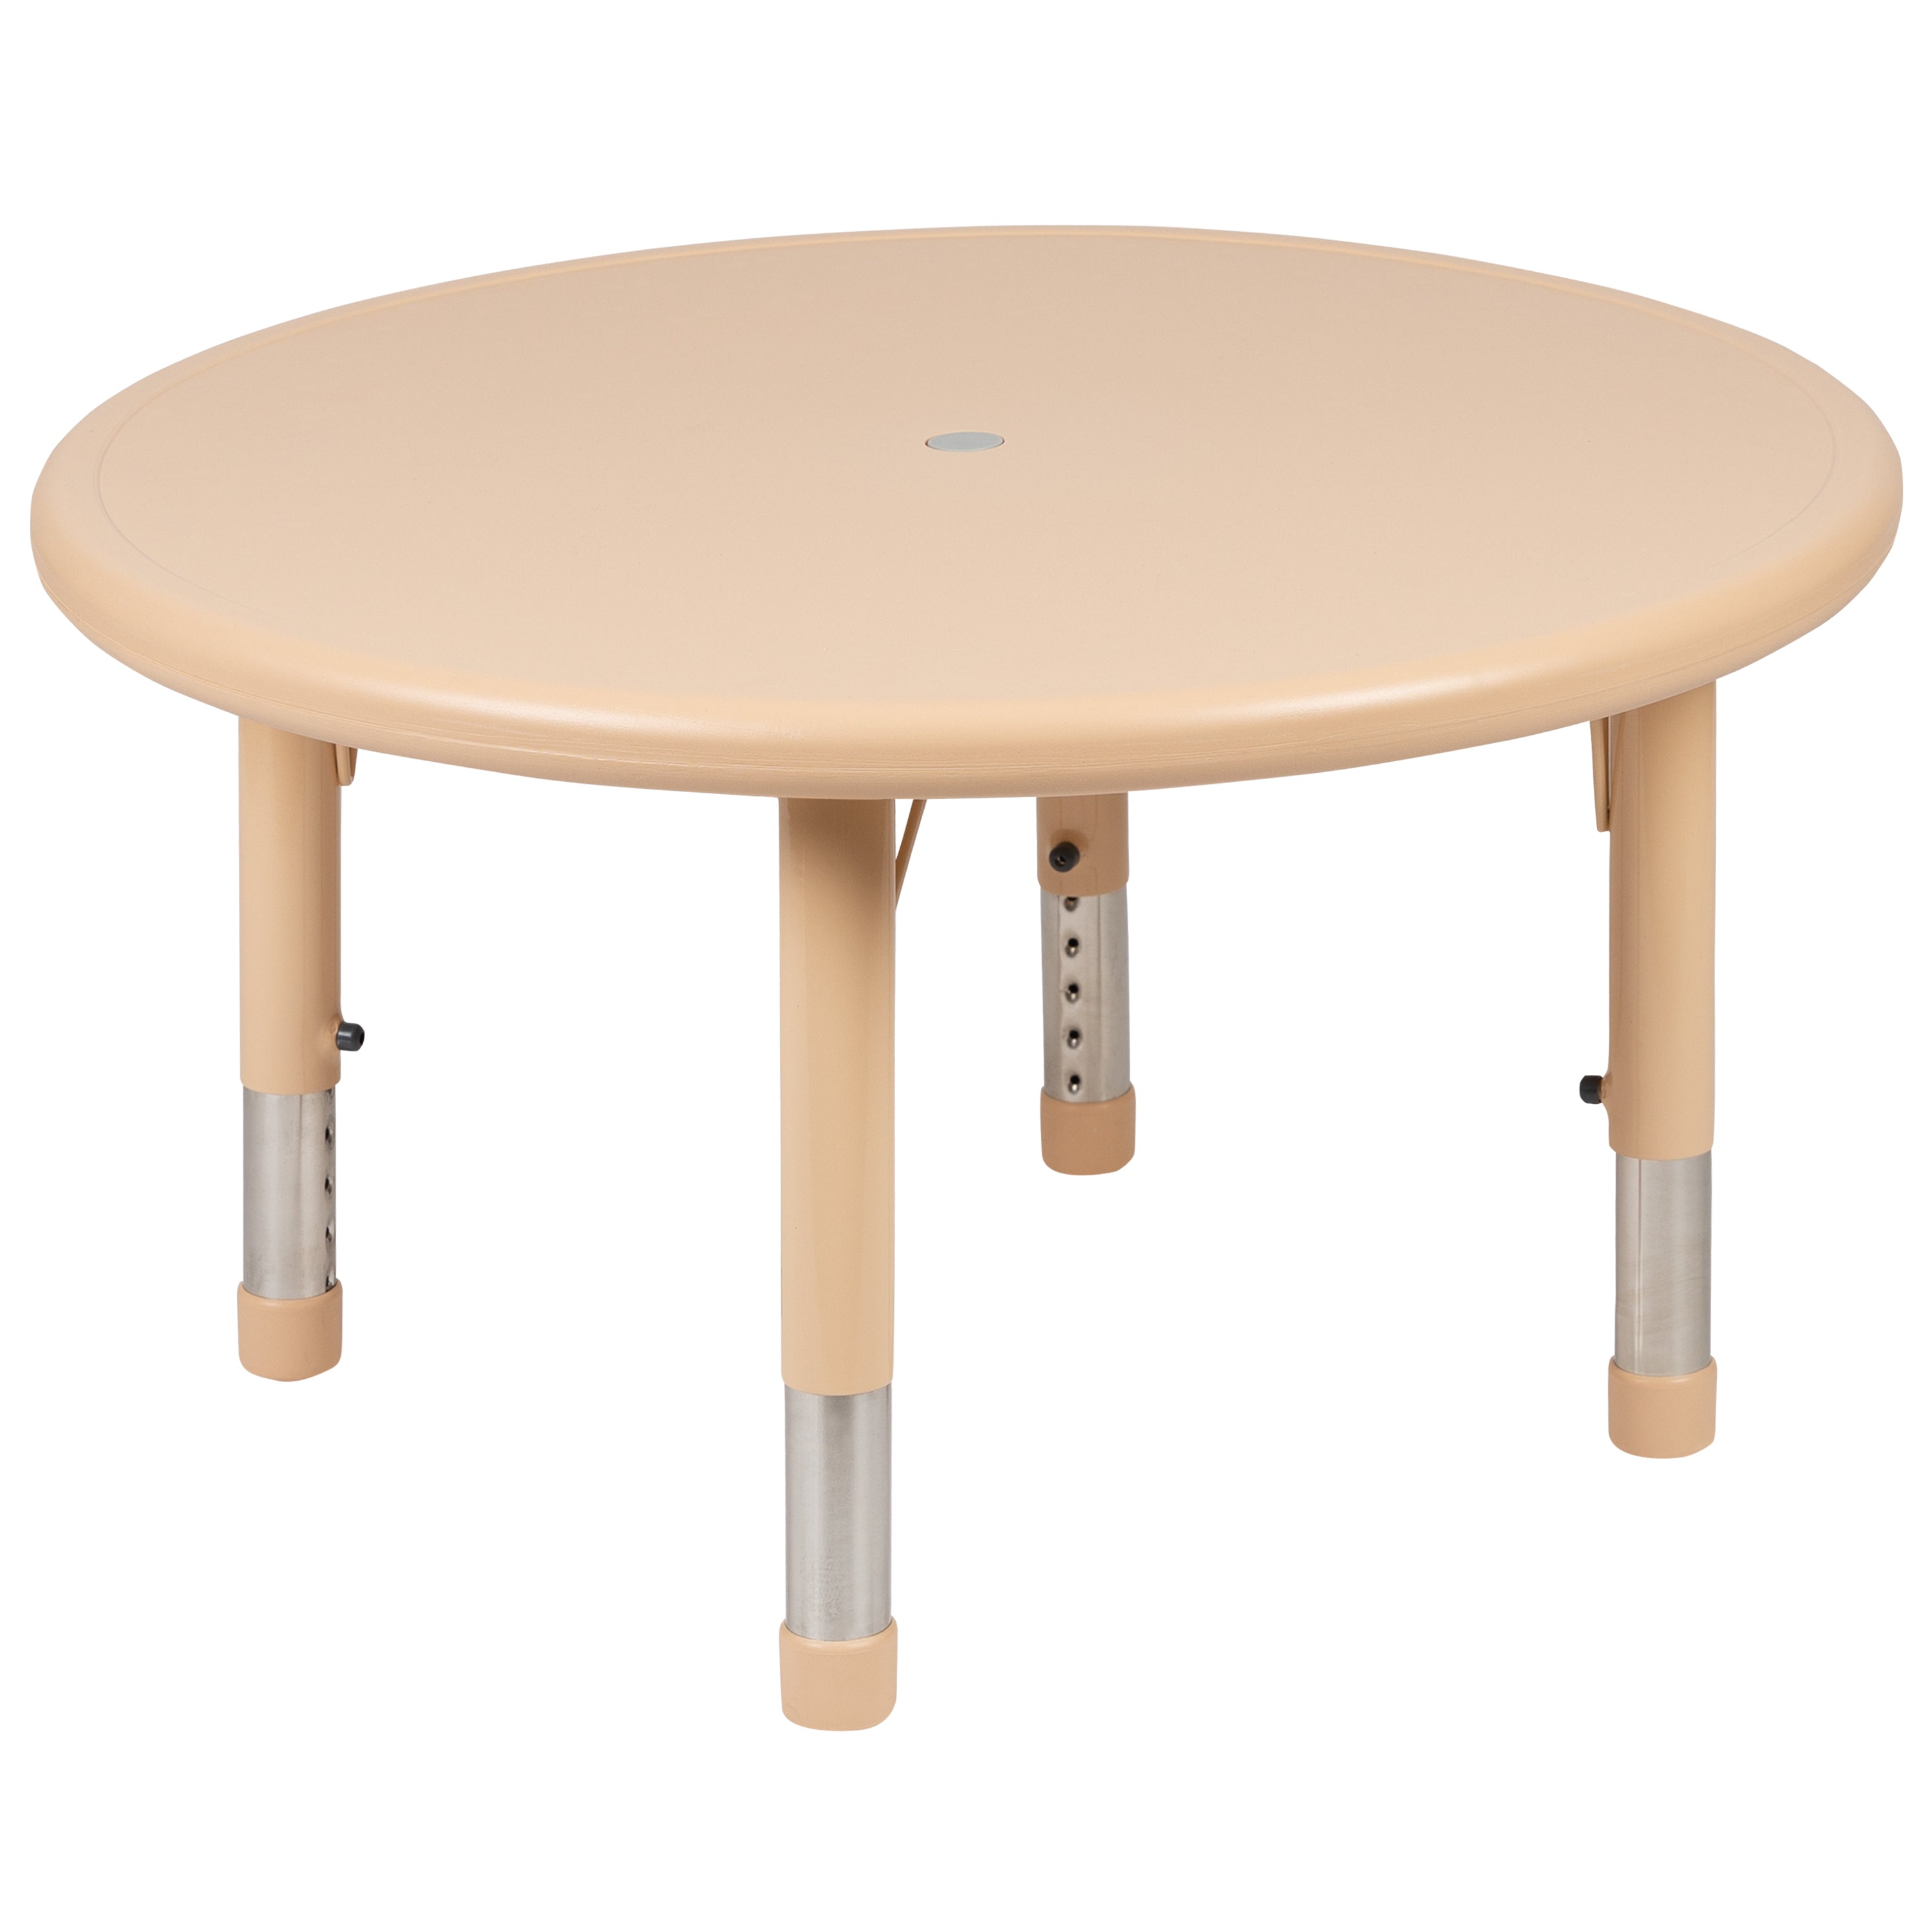 33" Round Plastic Height Adjustable Activity Table Set with 4 Chairs-Round Activity Table Set-Flash Furniture-Wall2Wall Furnishings